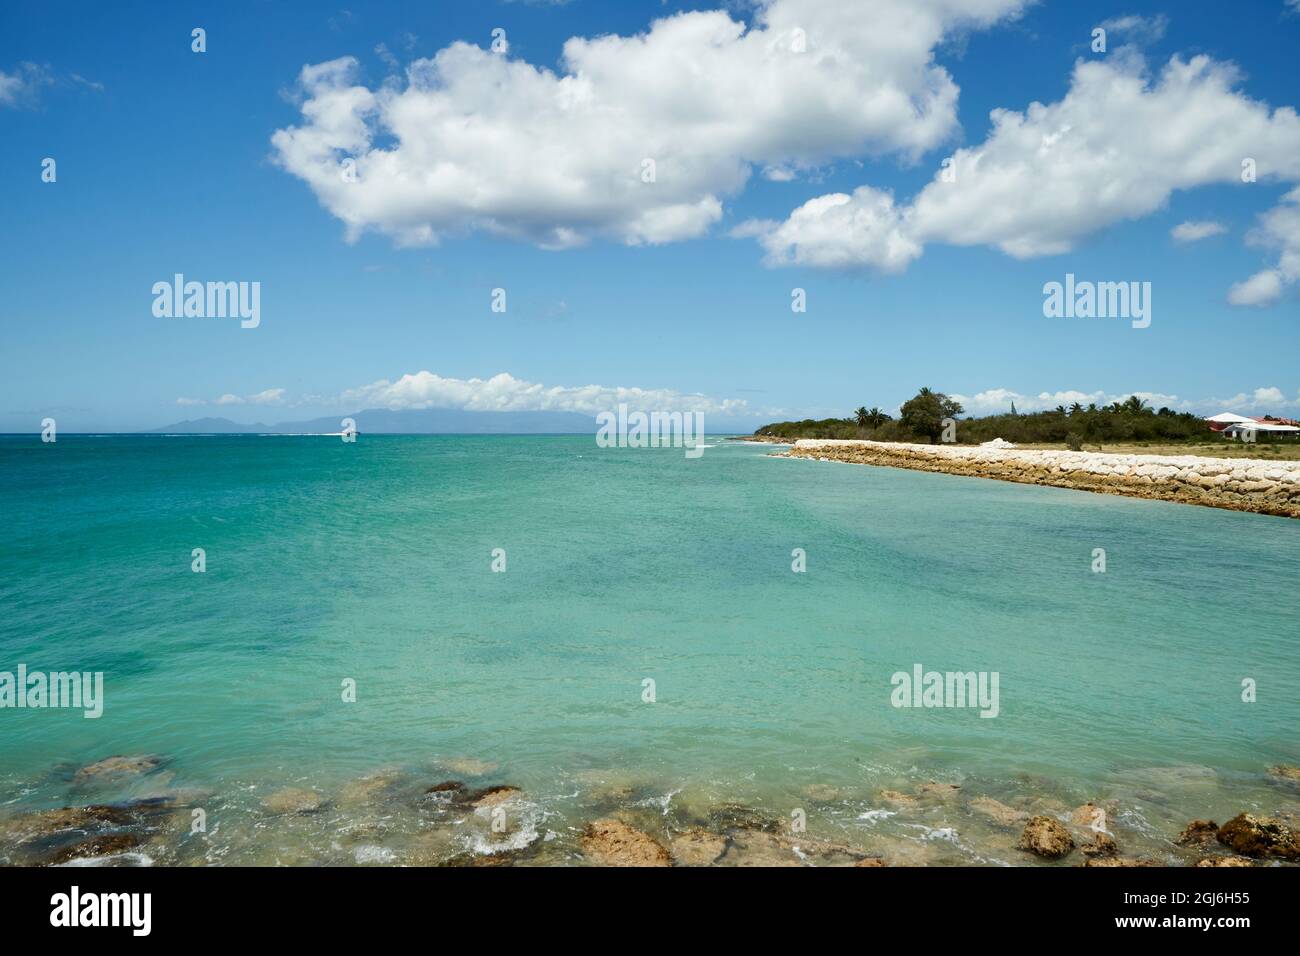 Marie Galante Island High Resolution Stock Photography and Images - Alamy